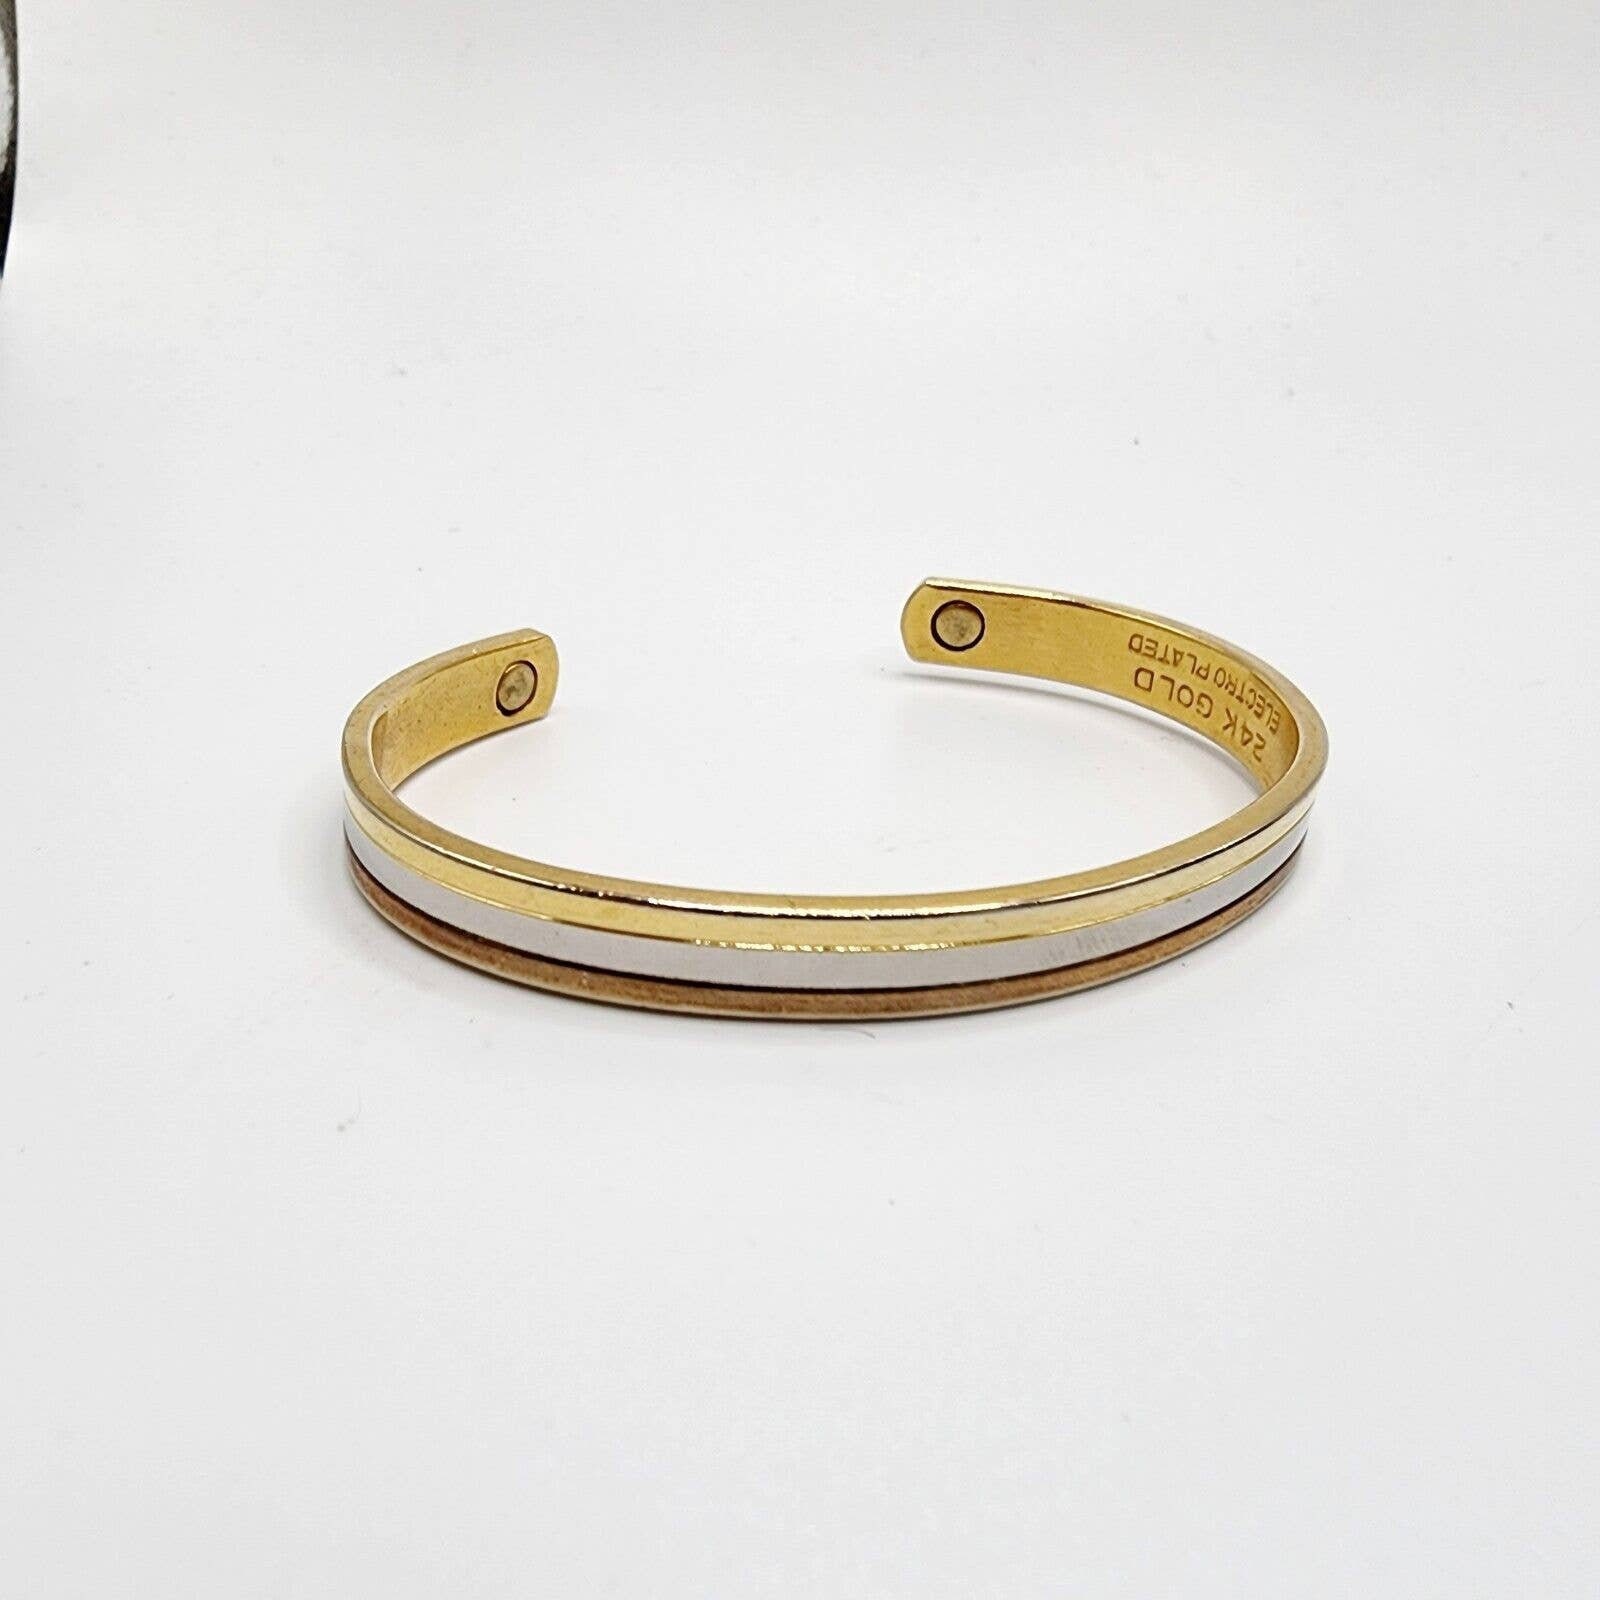 24kt Gold Plating on Copper Bangles #gold #electroplating  #silver#stainlesssteel#immitationjewellery 